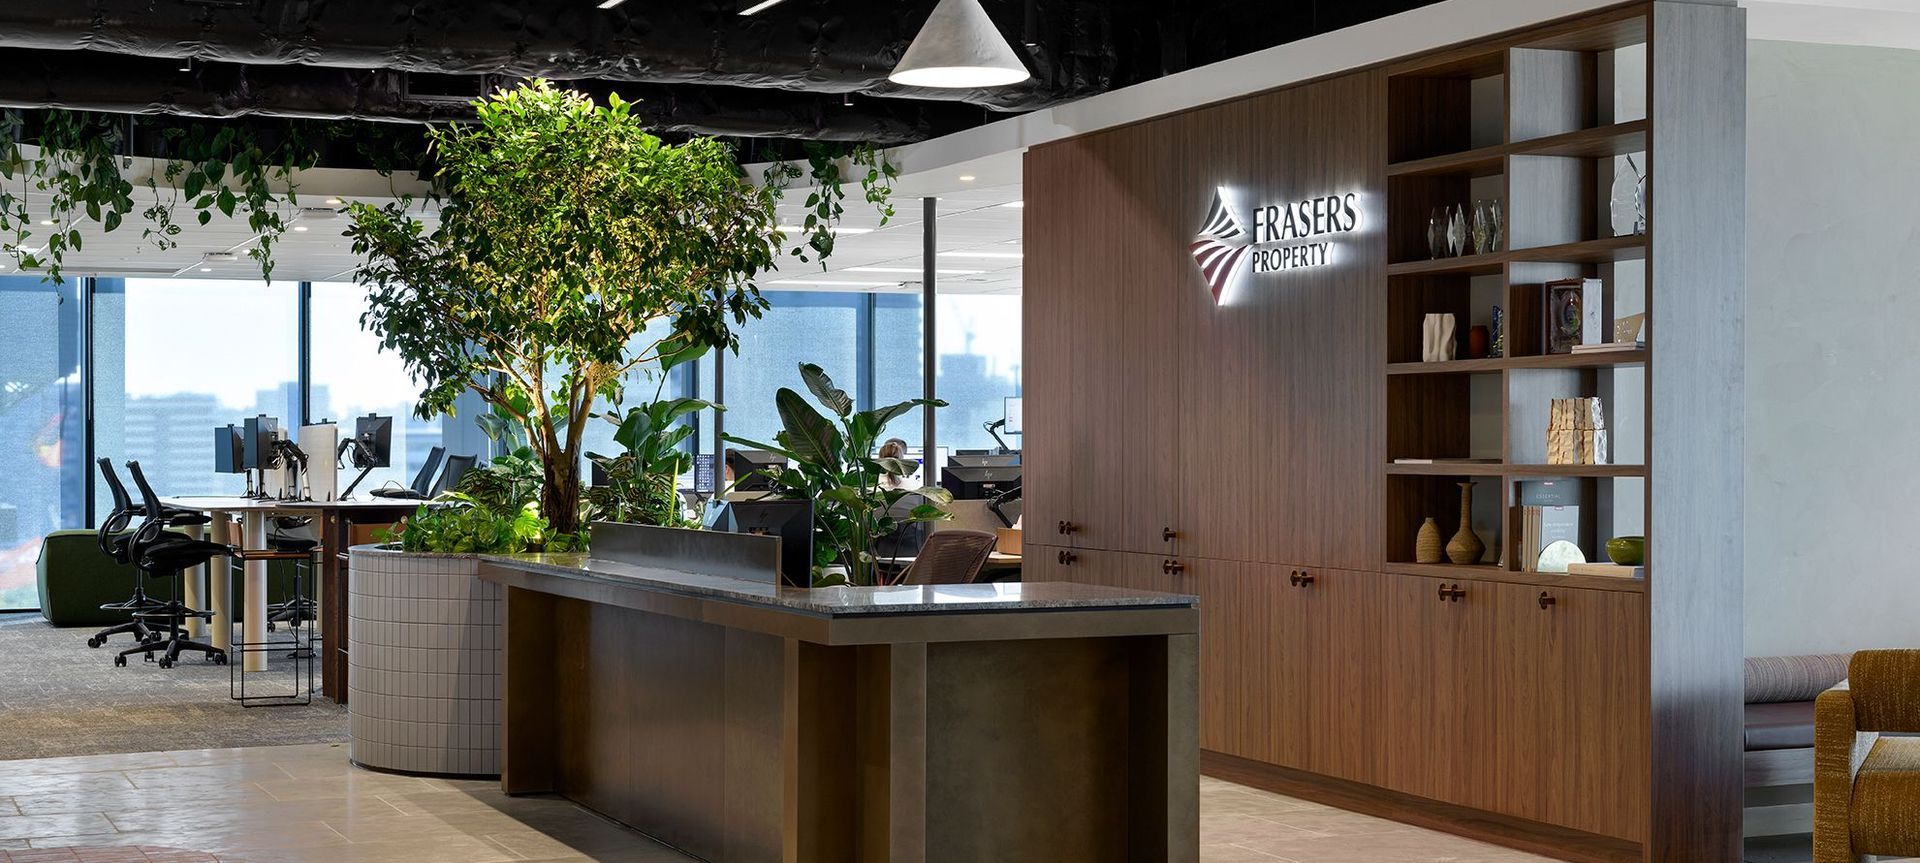 Frasers Property Office banner